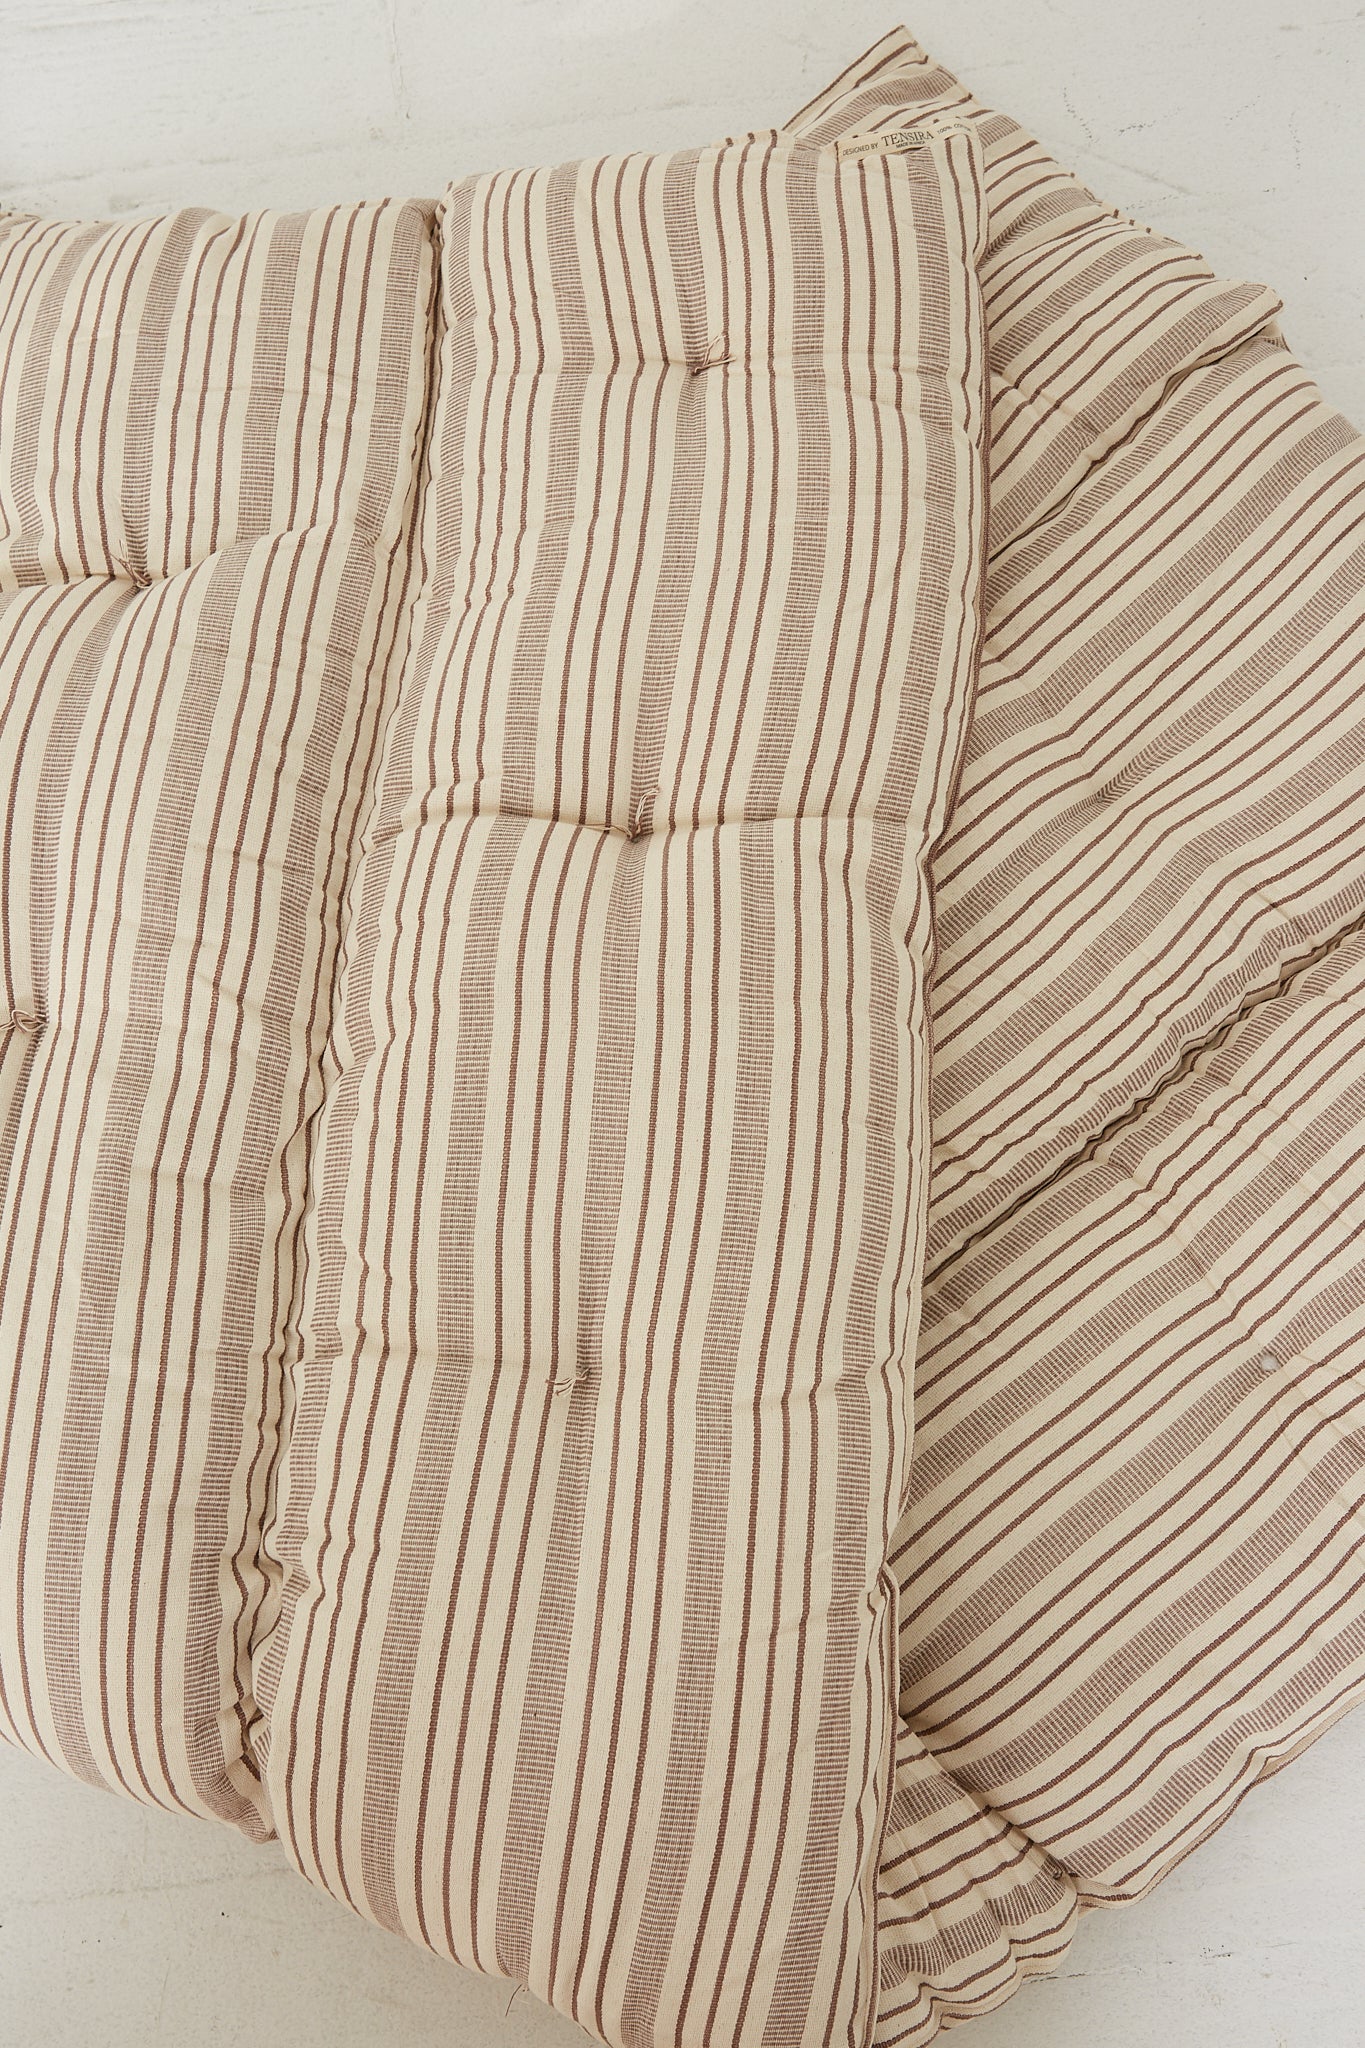 A Tensira Tufted Overlay Mattress in Chocolate Brown and Off White Stripe mattress folded.